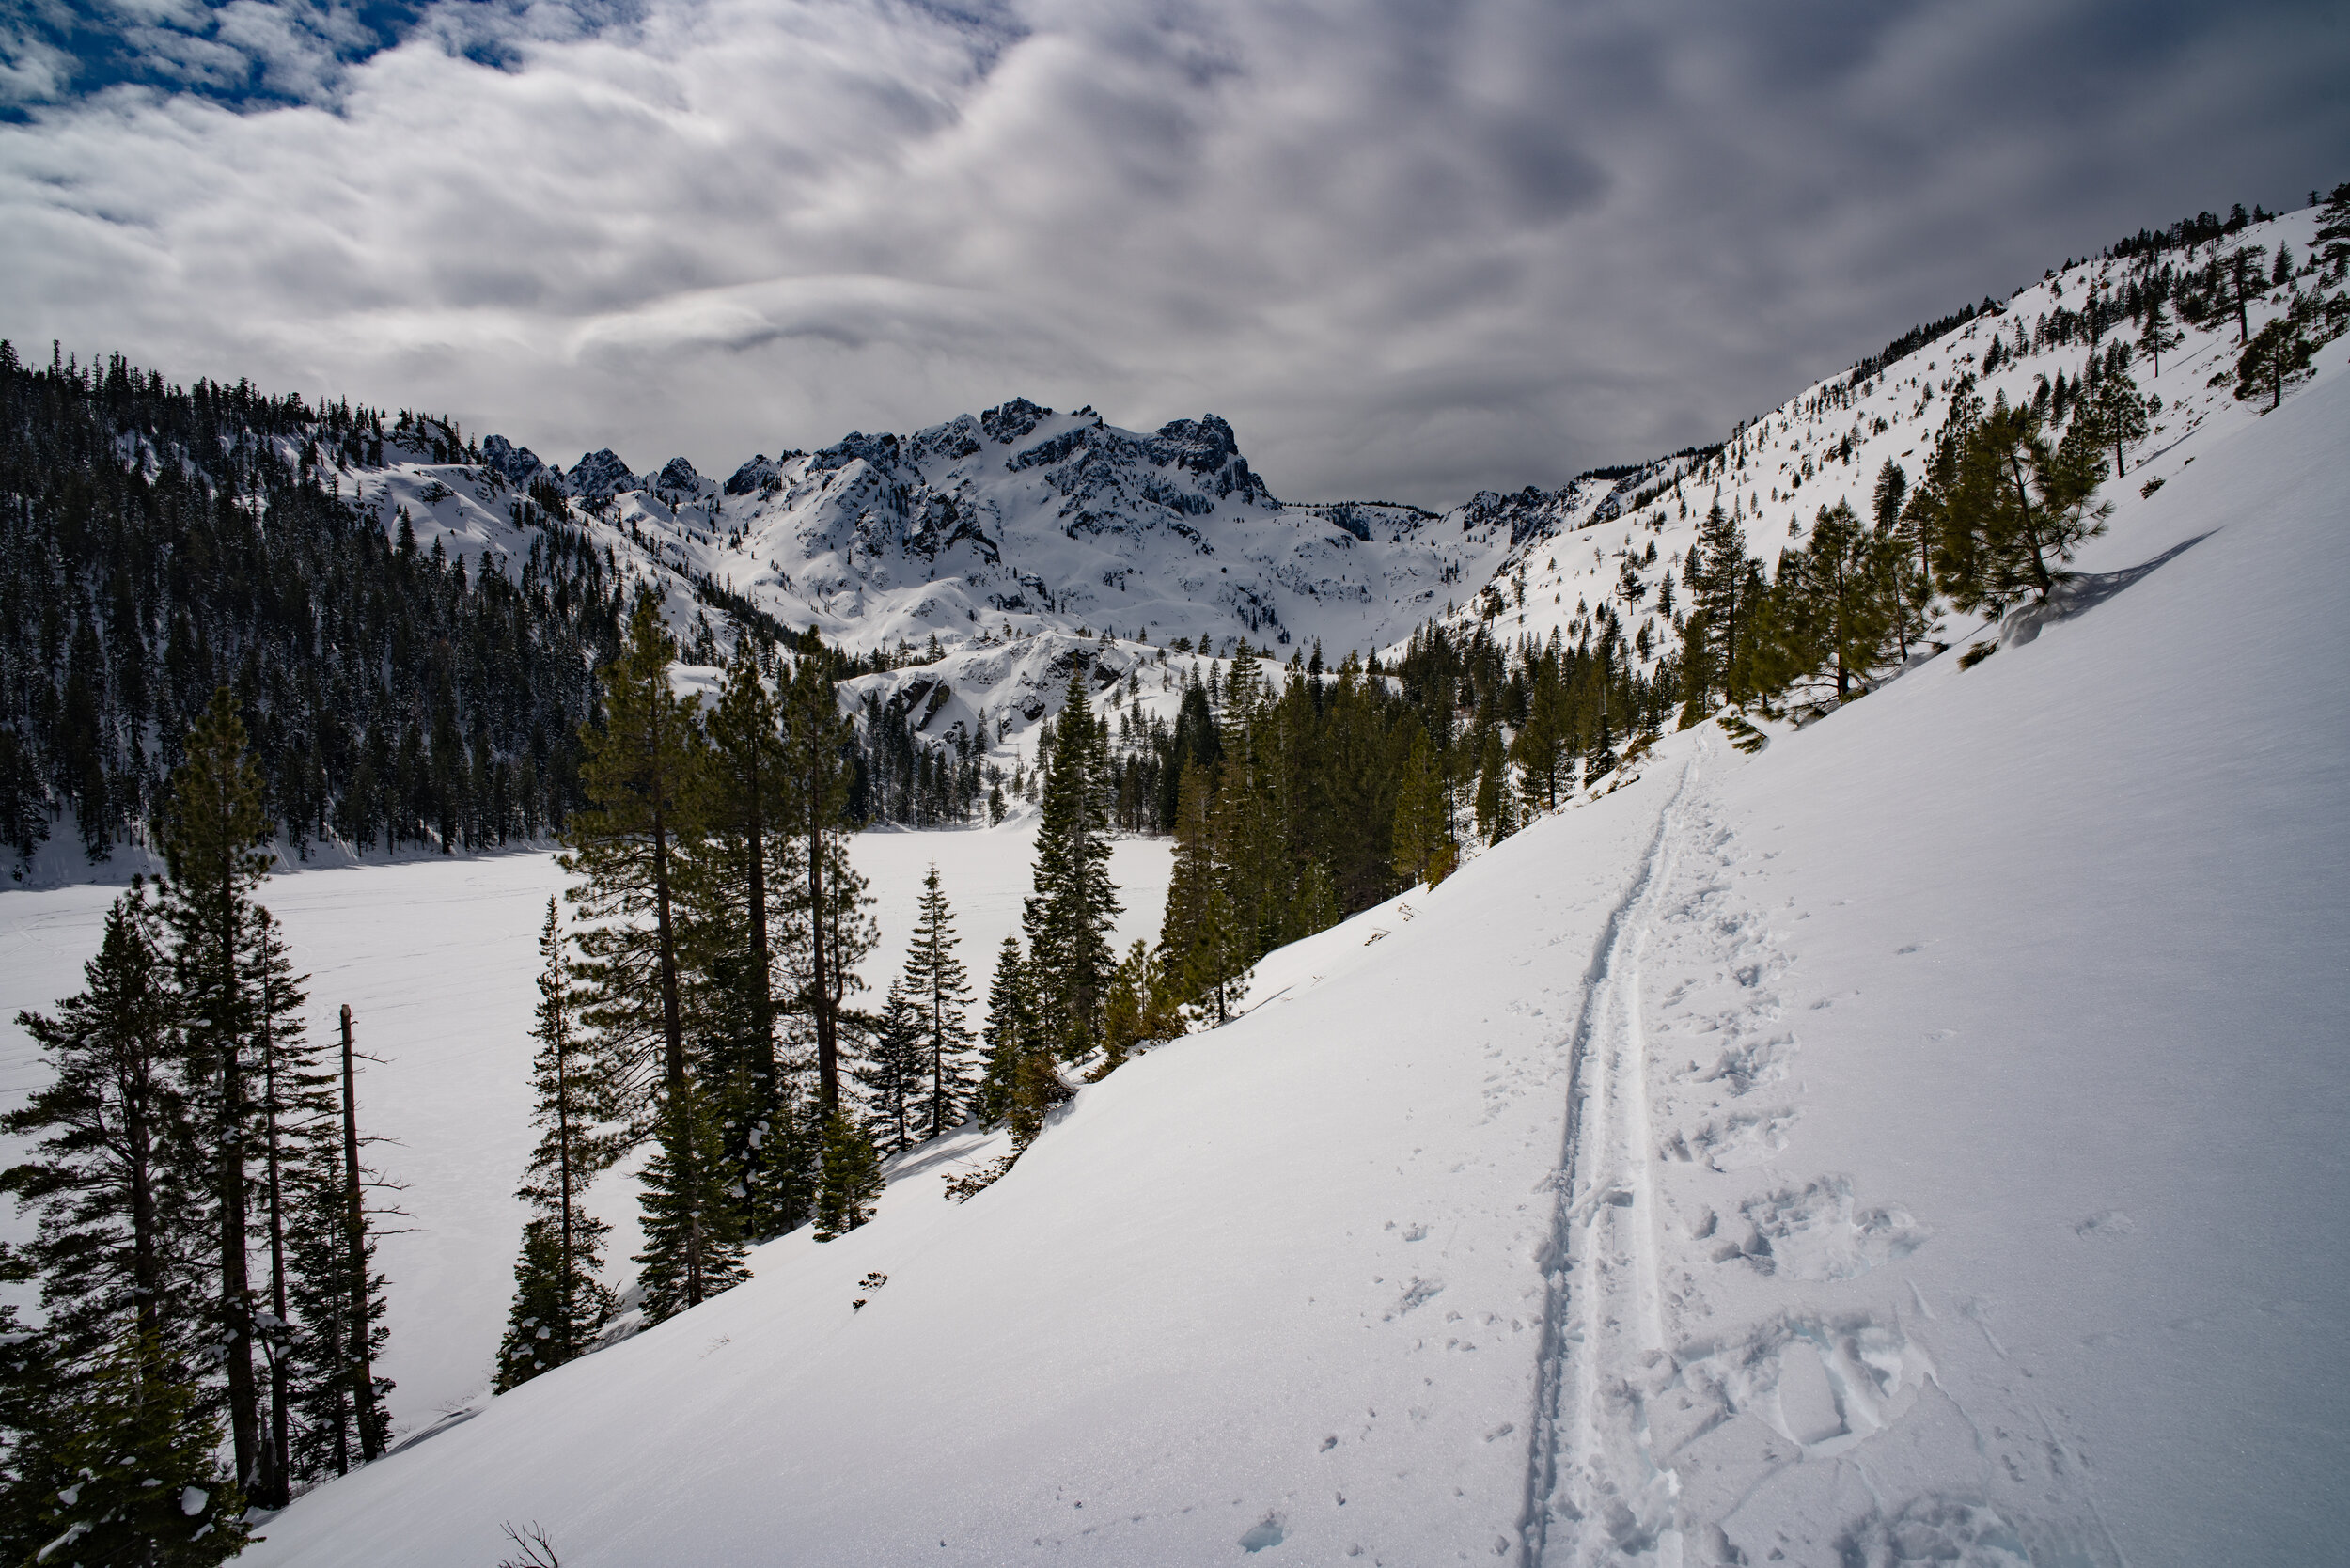  Ski touring around Lower Sardine Lake to get to the base of the Sierra Buttes. 